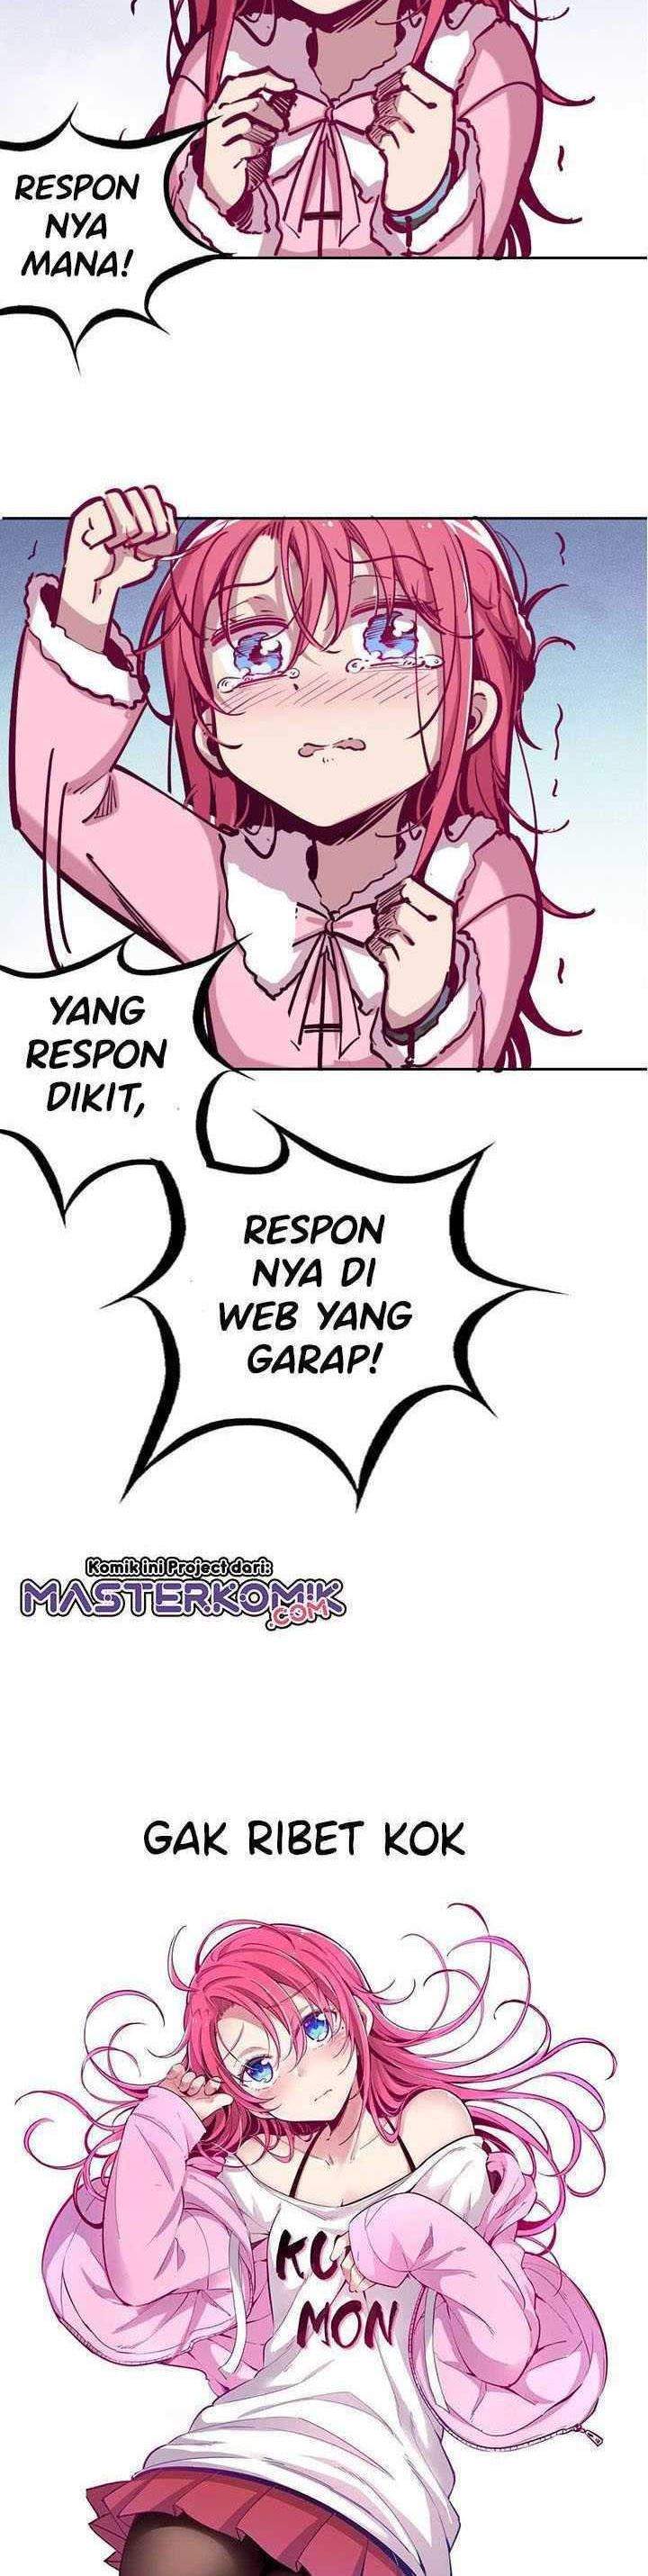 Demon X Angel, Can’t Get Along! Chapter 24